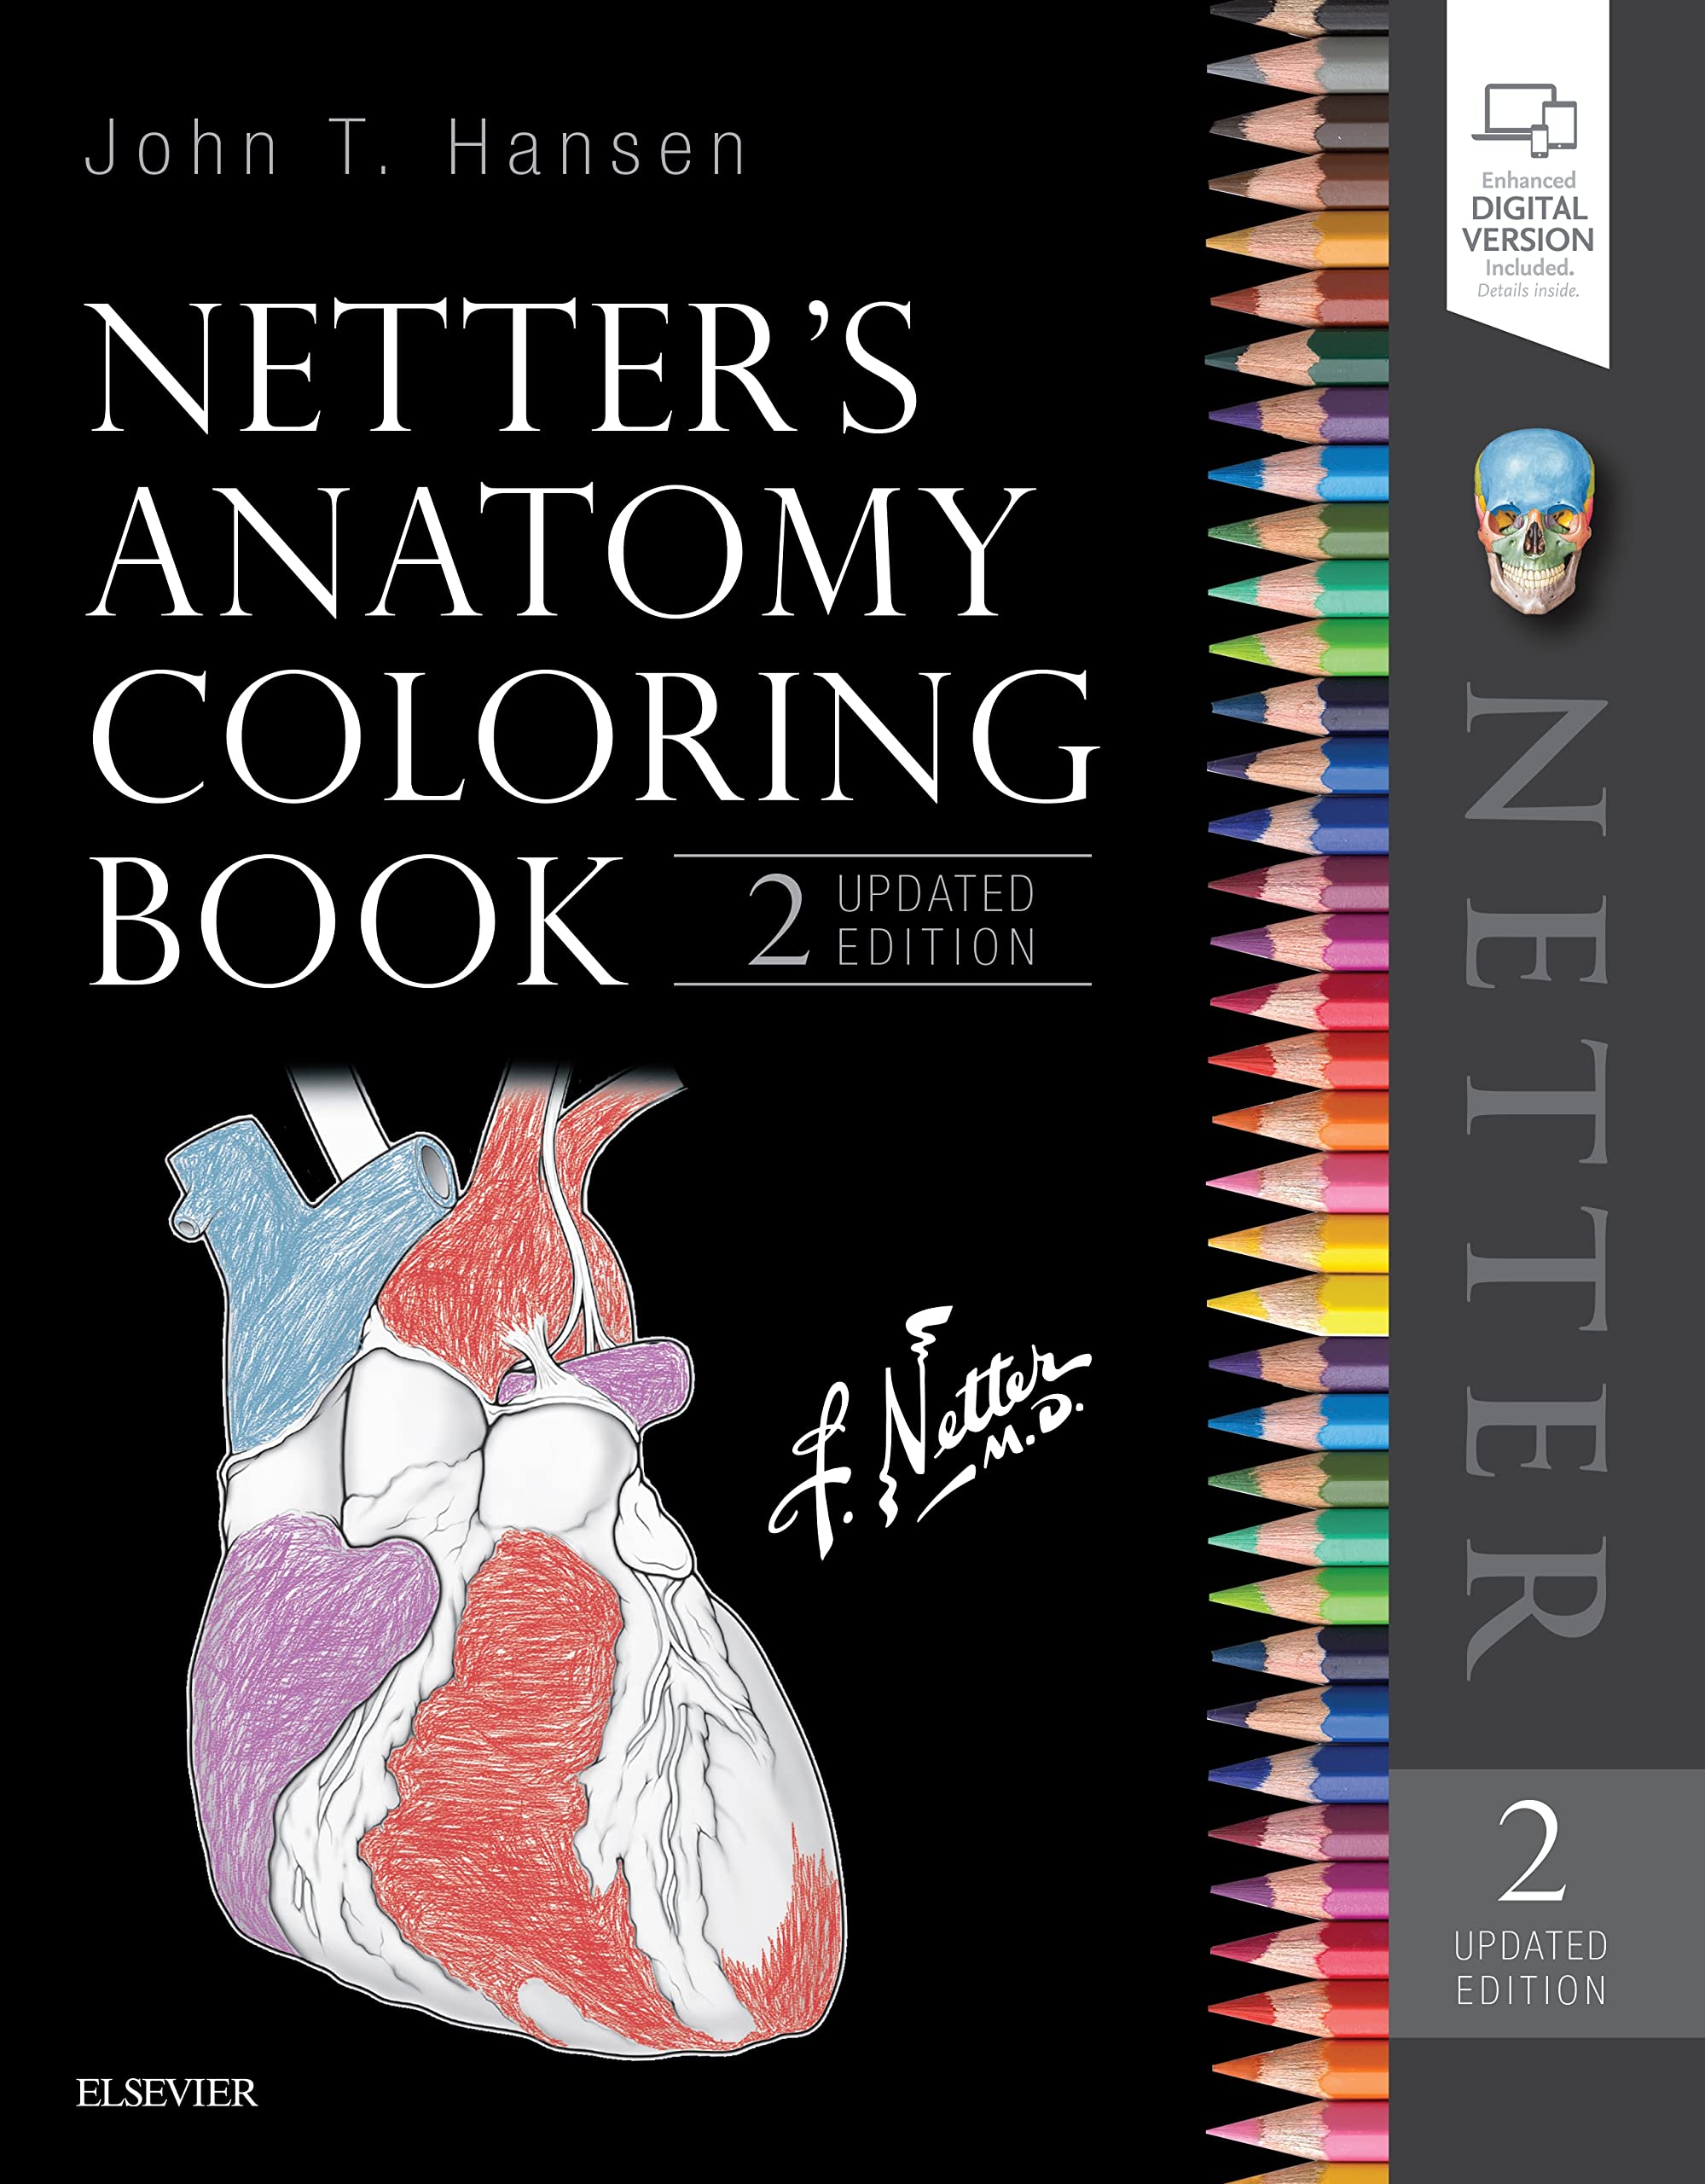 NETTER’S ANATOMY COLORING BOOK 2ND EDITION PDF Free Download